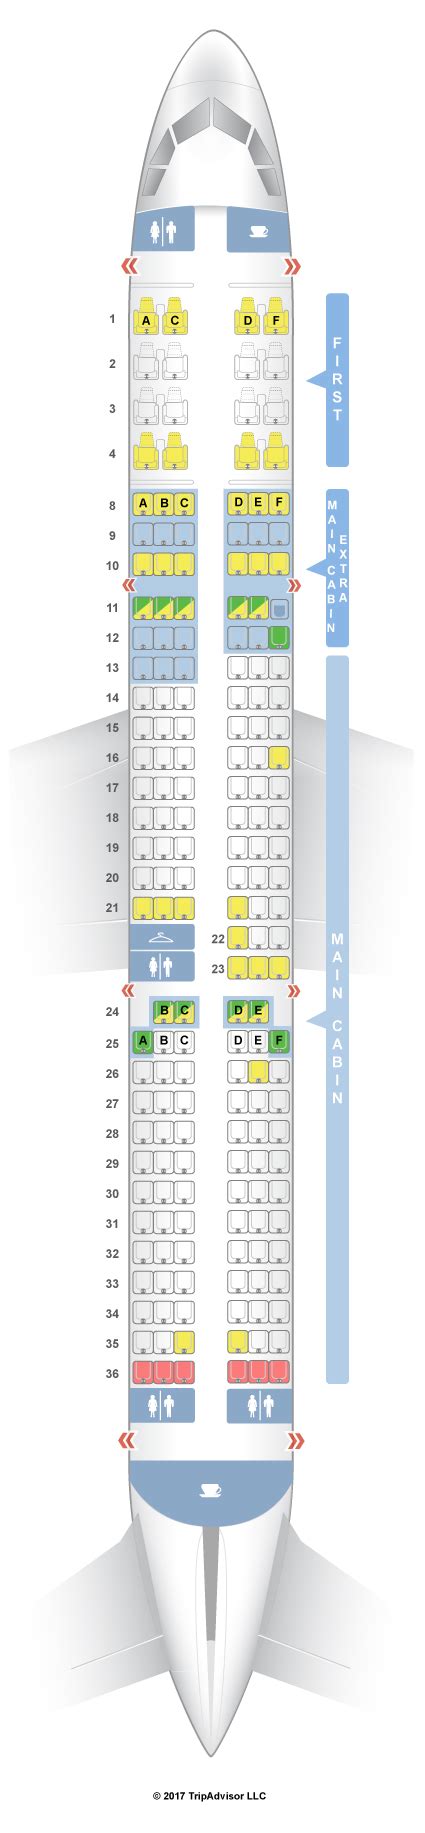 SEAT MAP A321/A321 NEO. Hot Seat. Domestic flight. 90.000 VND. International flight. 250.000 VND. Front Seat. Domestic flight. 40.000 VND. International flight.. 